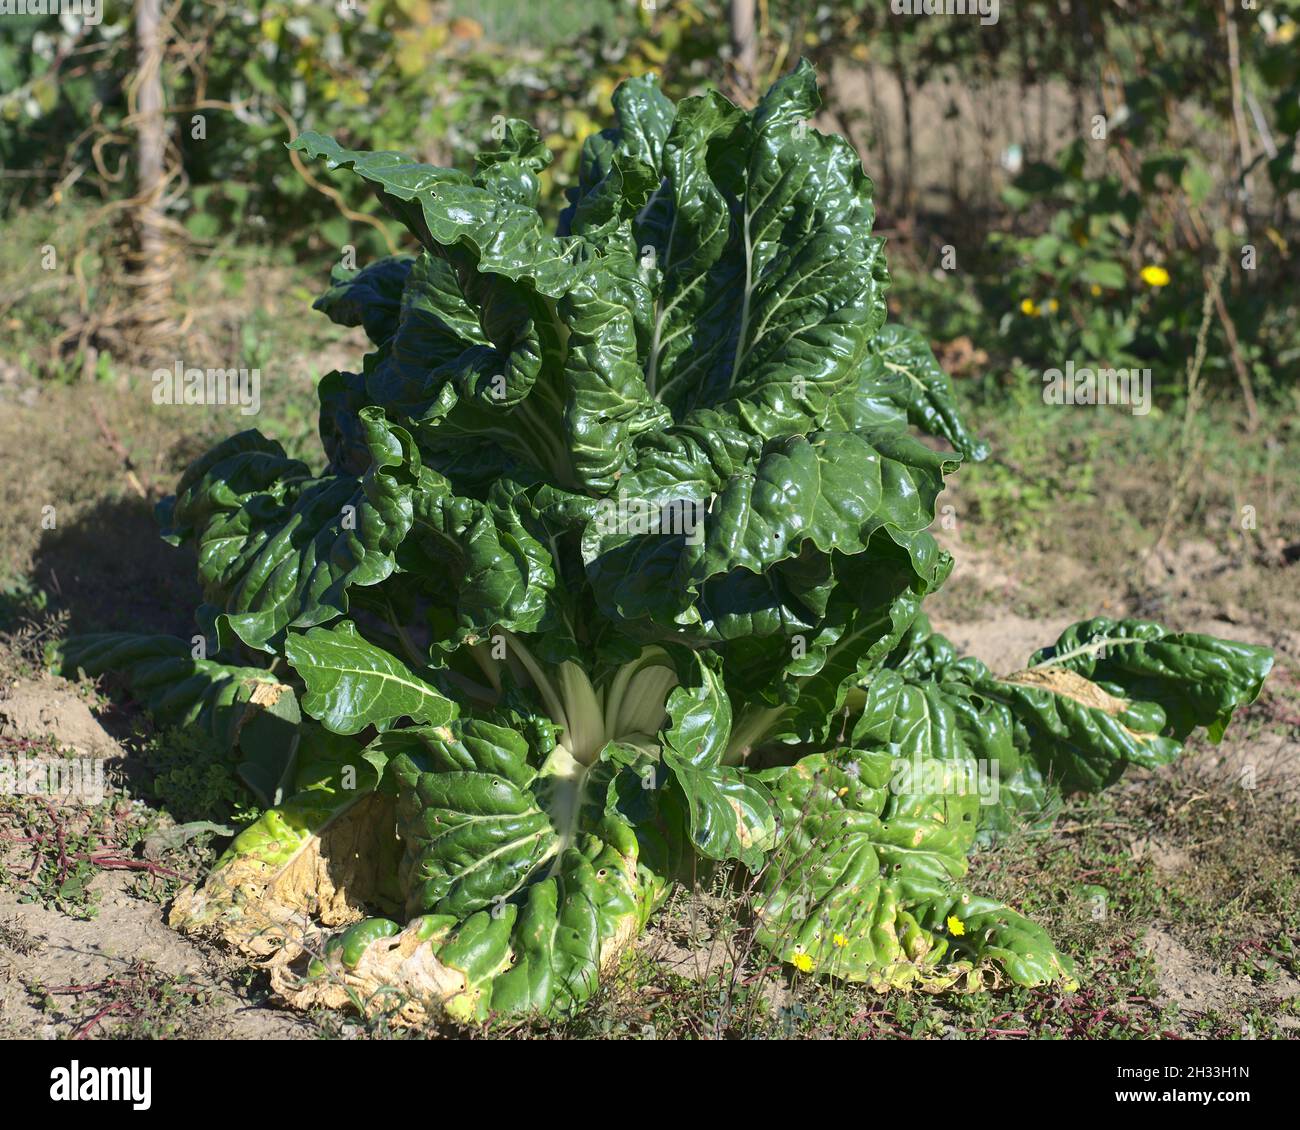 a large white swiss chard vegetable plant in the garden Stock Photo